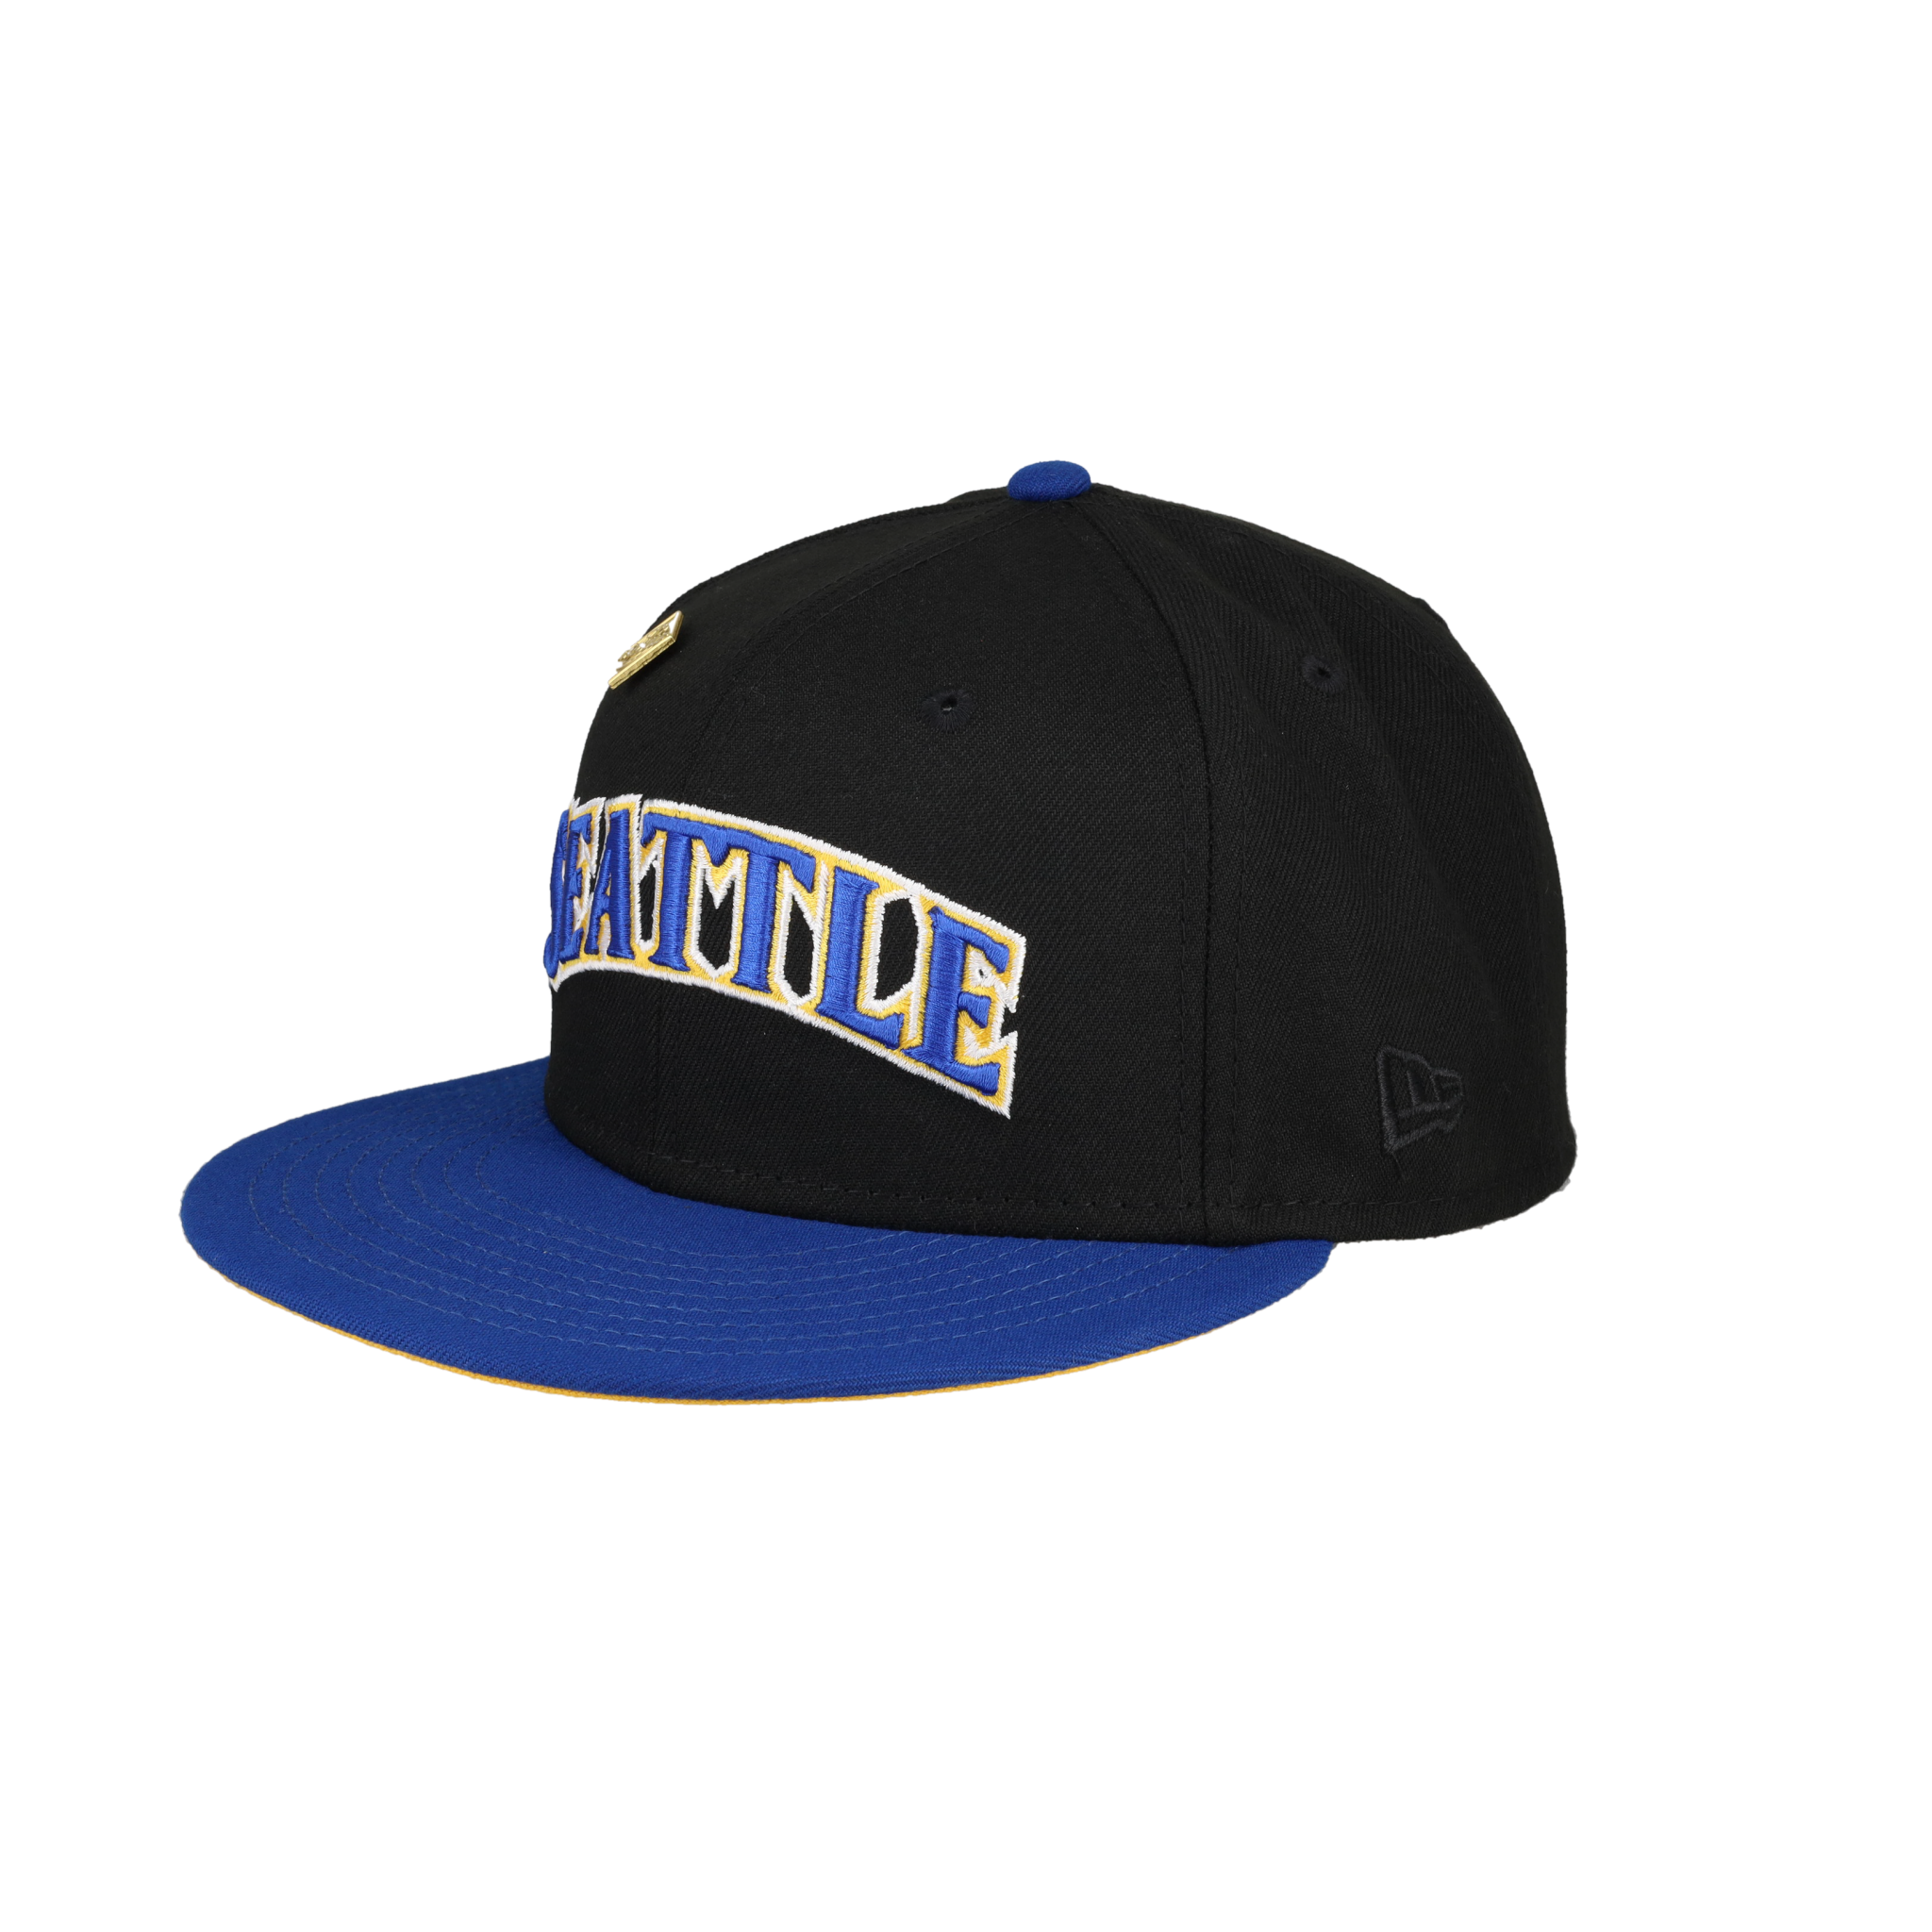 Montreal Royals Dark Royal Blue New Era 59Fifty Fitted